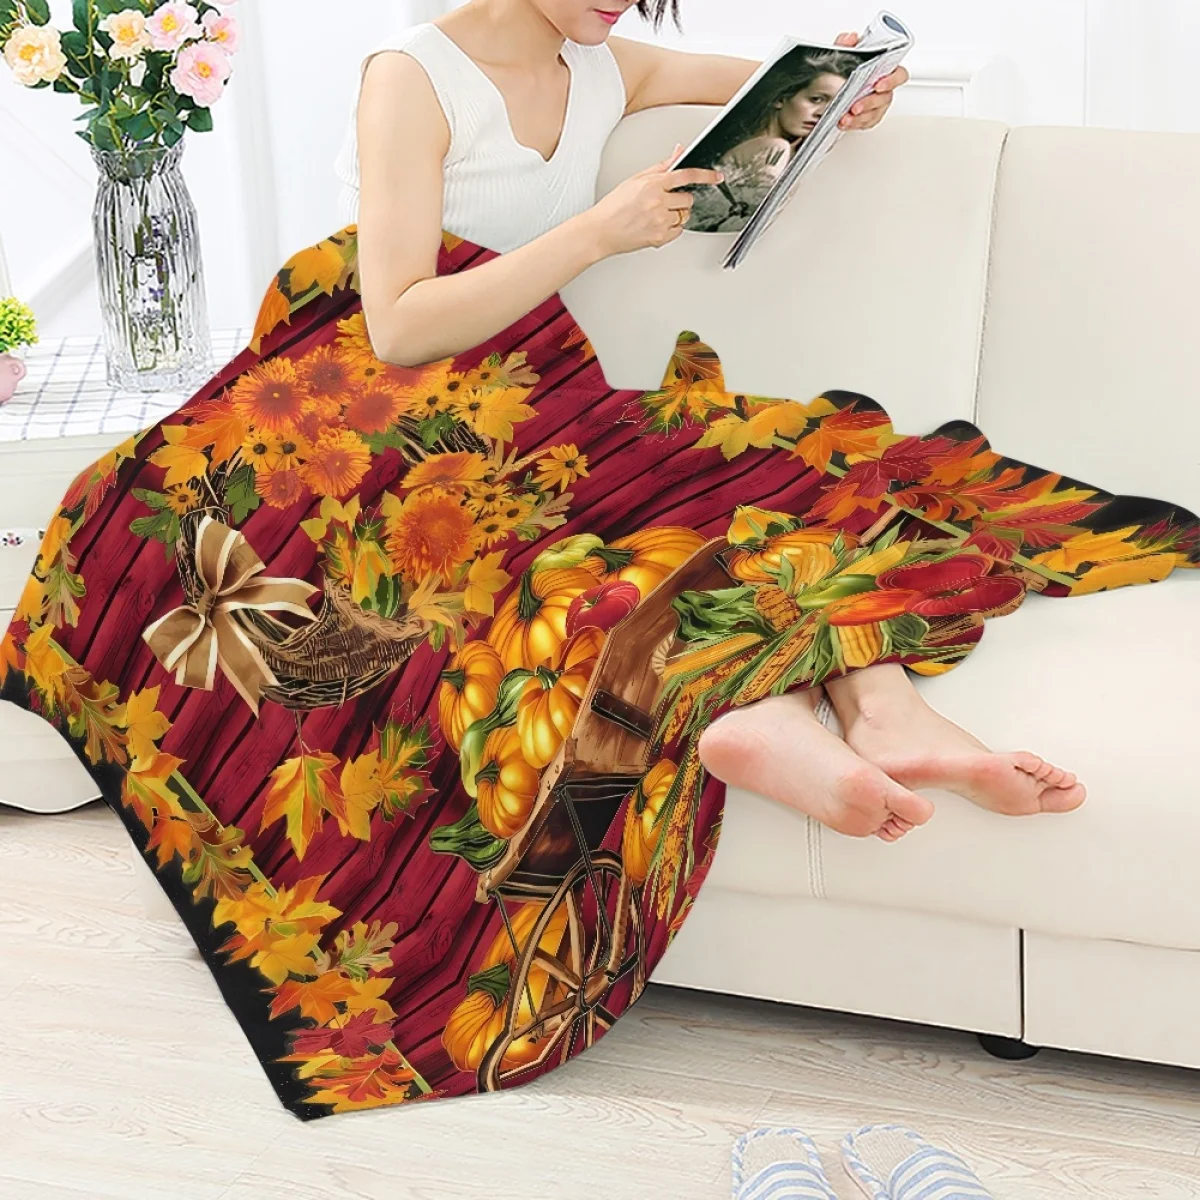 

TOADDMOS Thanksgiving Gift Autumn Pumpkin Leaf Harvest Design Blankets Plush Comfort Quilt for Bed Sofa Couch Throw Blankets New